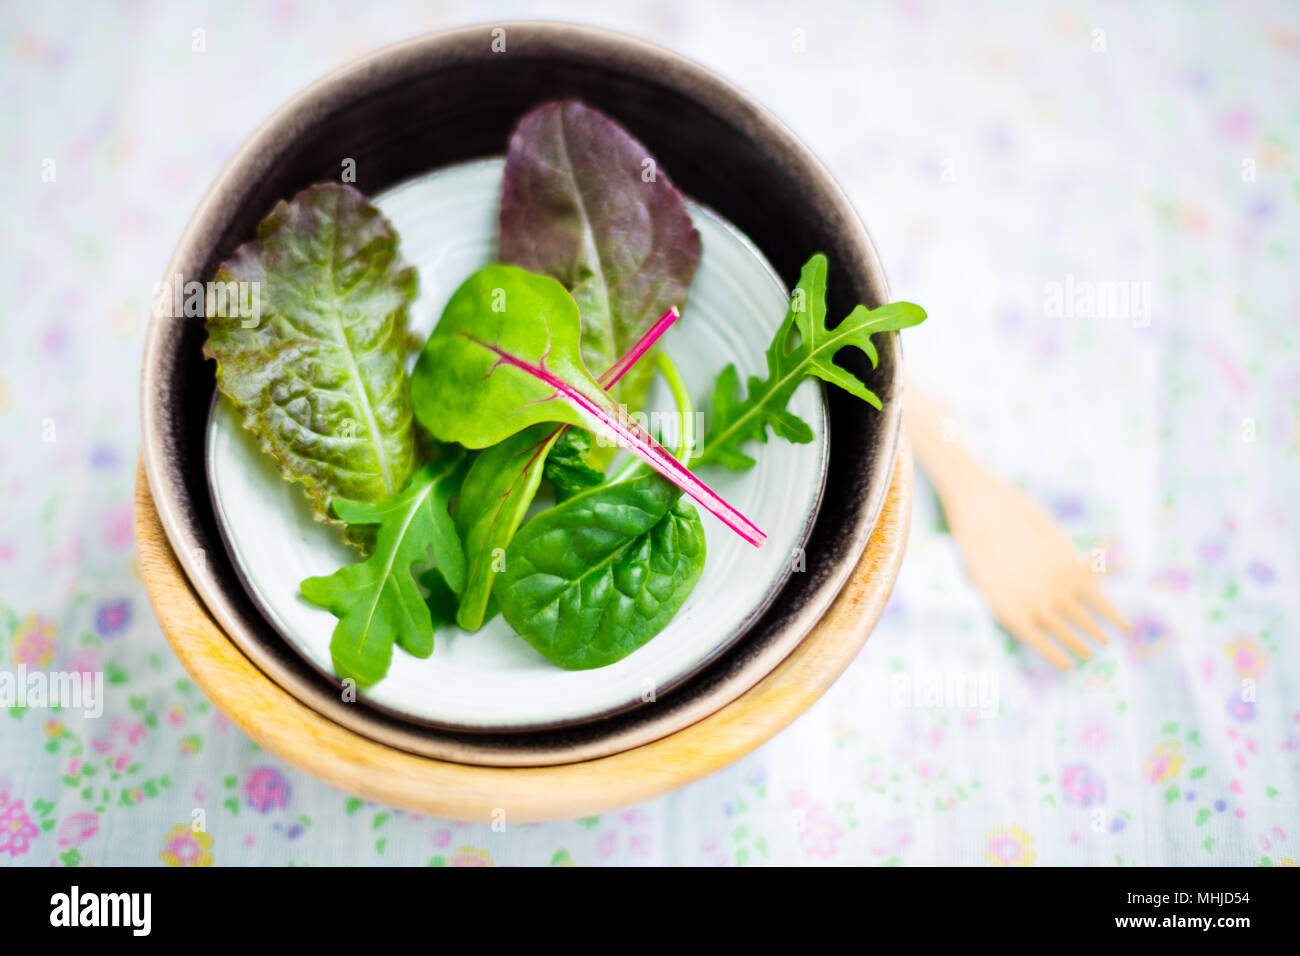 Mixed baby leaf salad of red chard, arugula, red lettuce and tatsoi in small bowls on a floral napkin, Selective focus Stock Photo